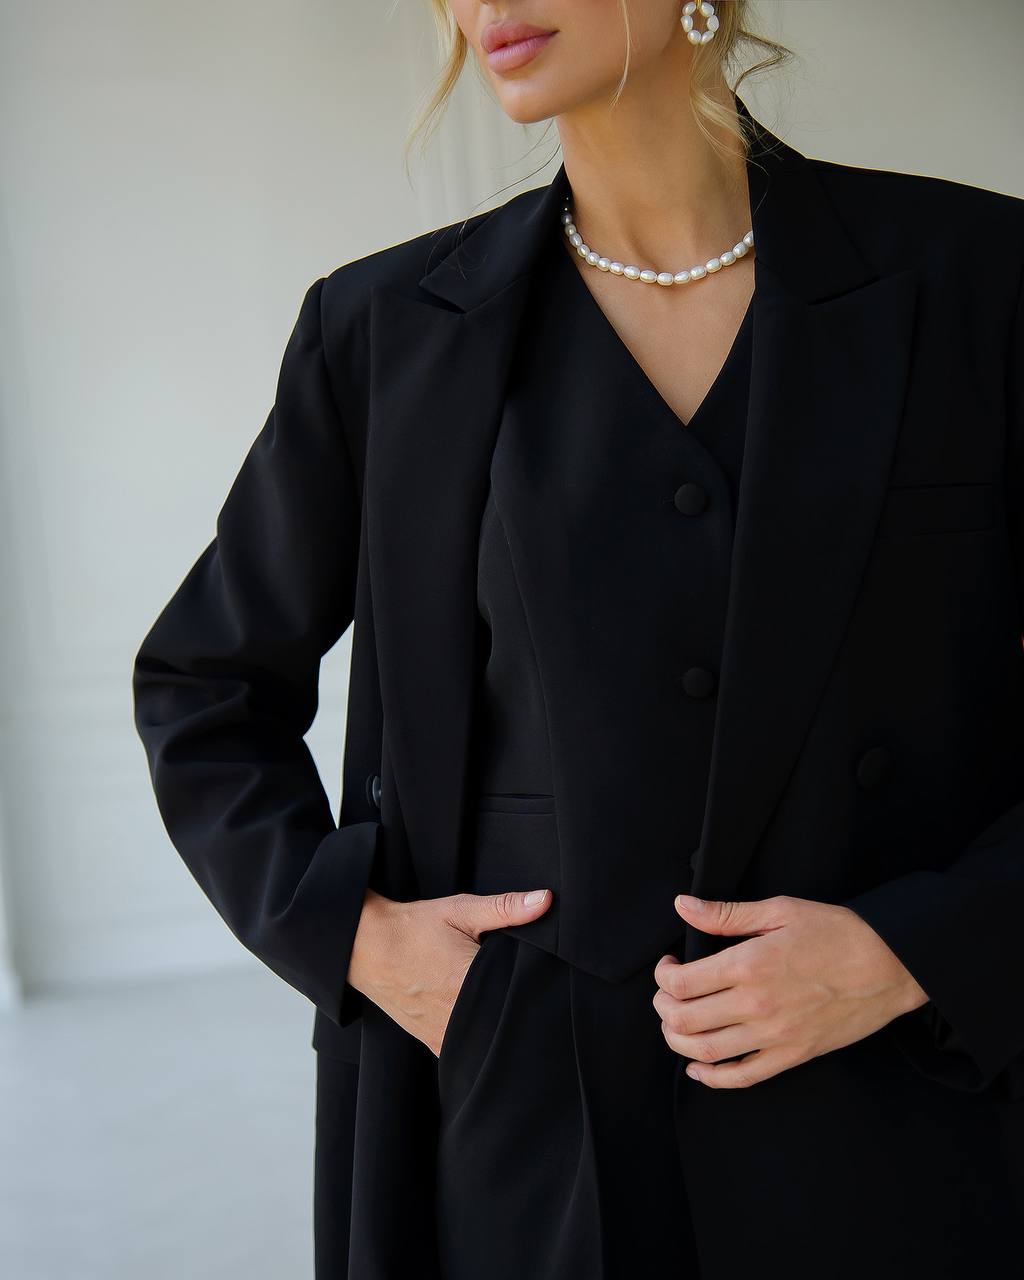 a woman wearing a black suit and pearl necklace